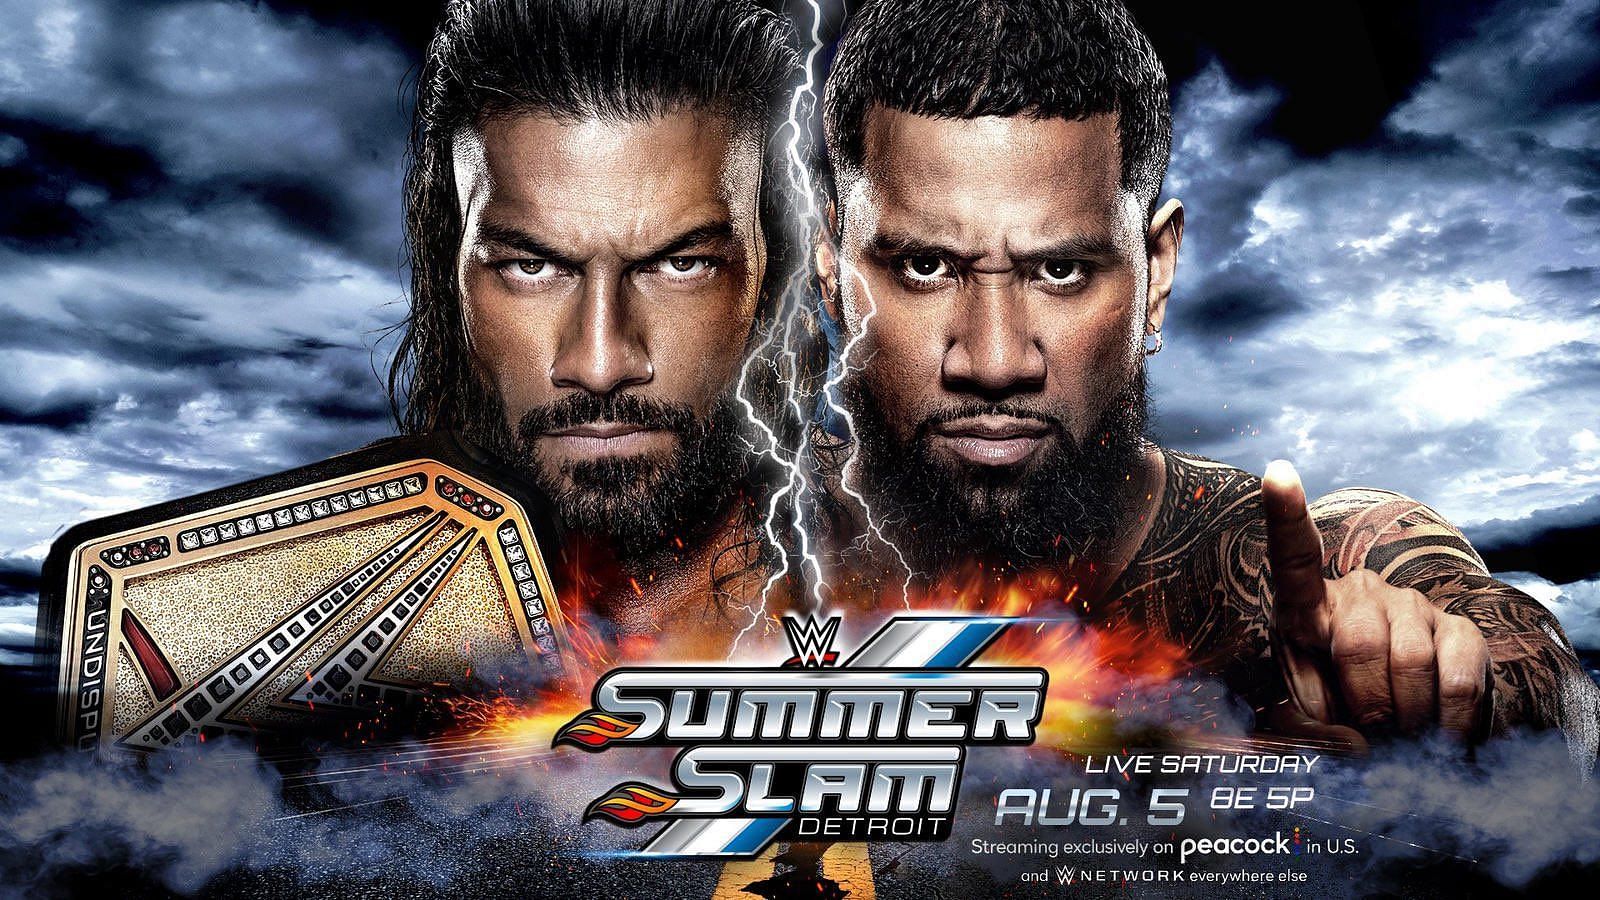 Reigns and Jey are confirmed for SummerSlam.